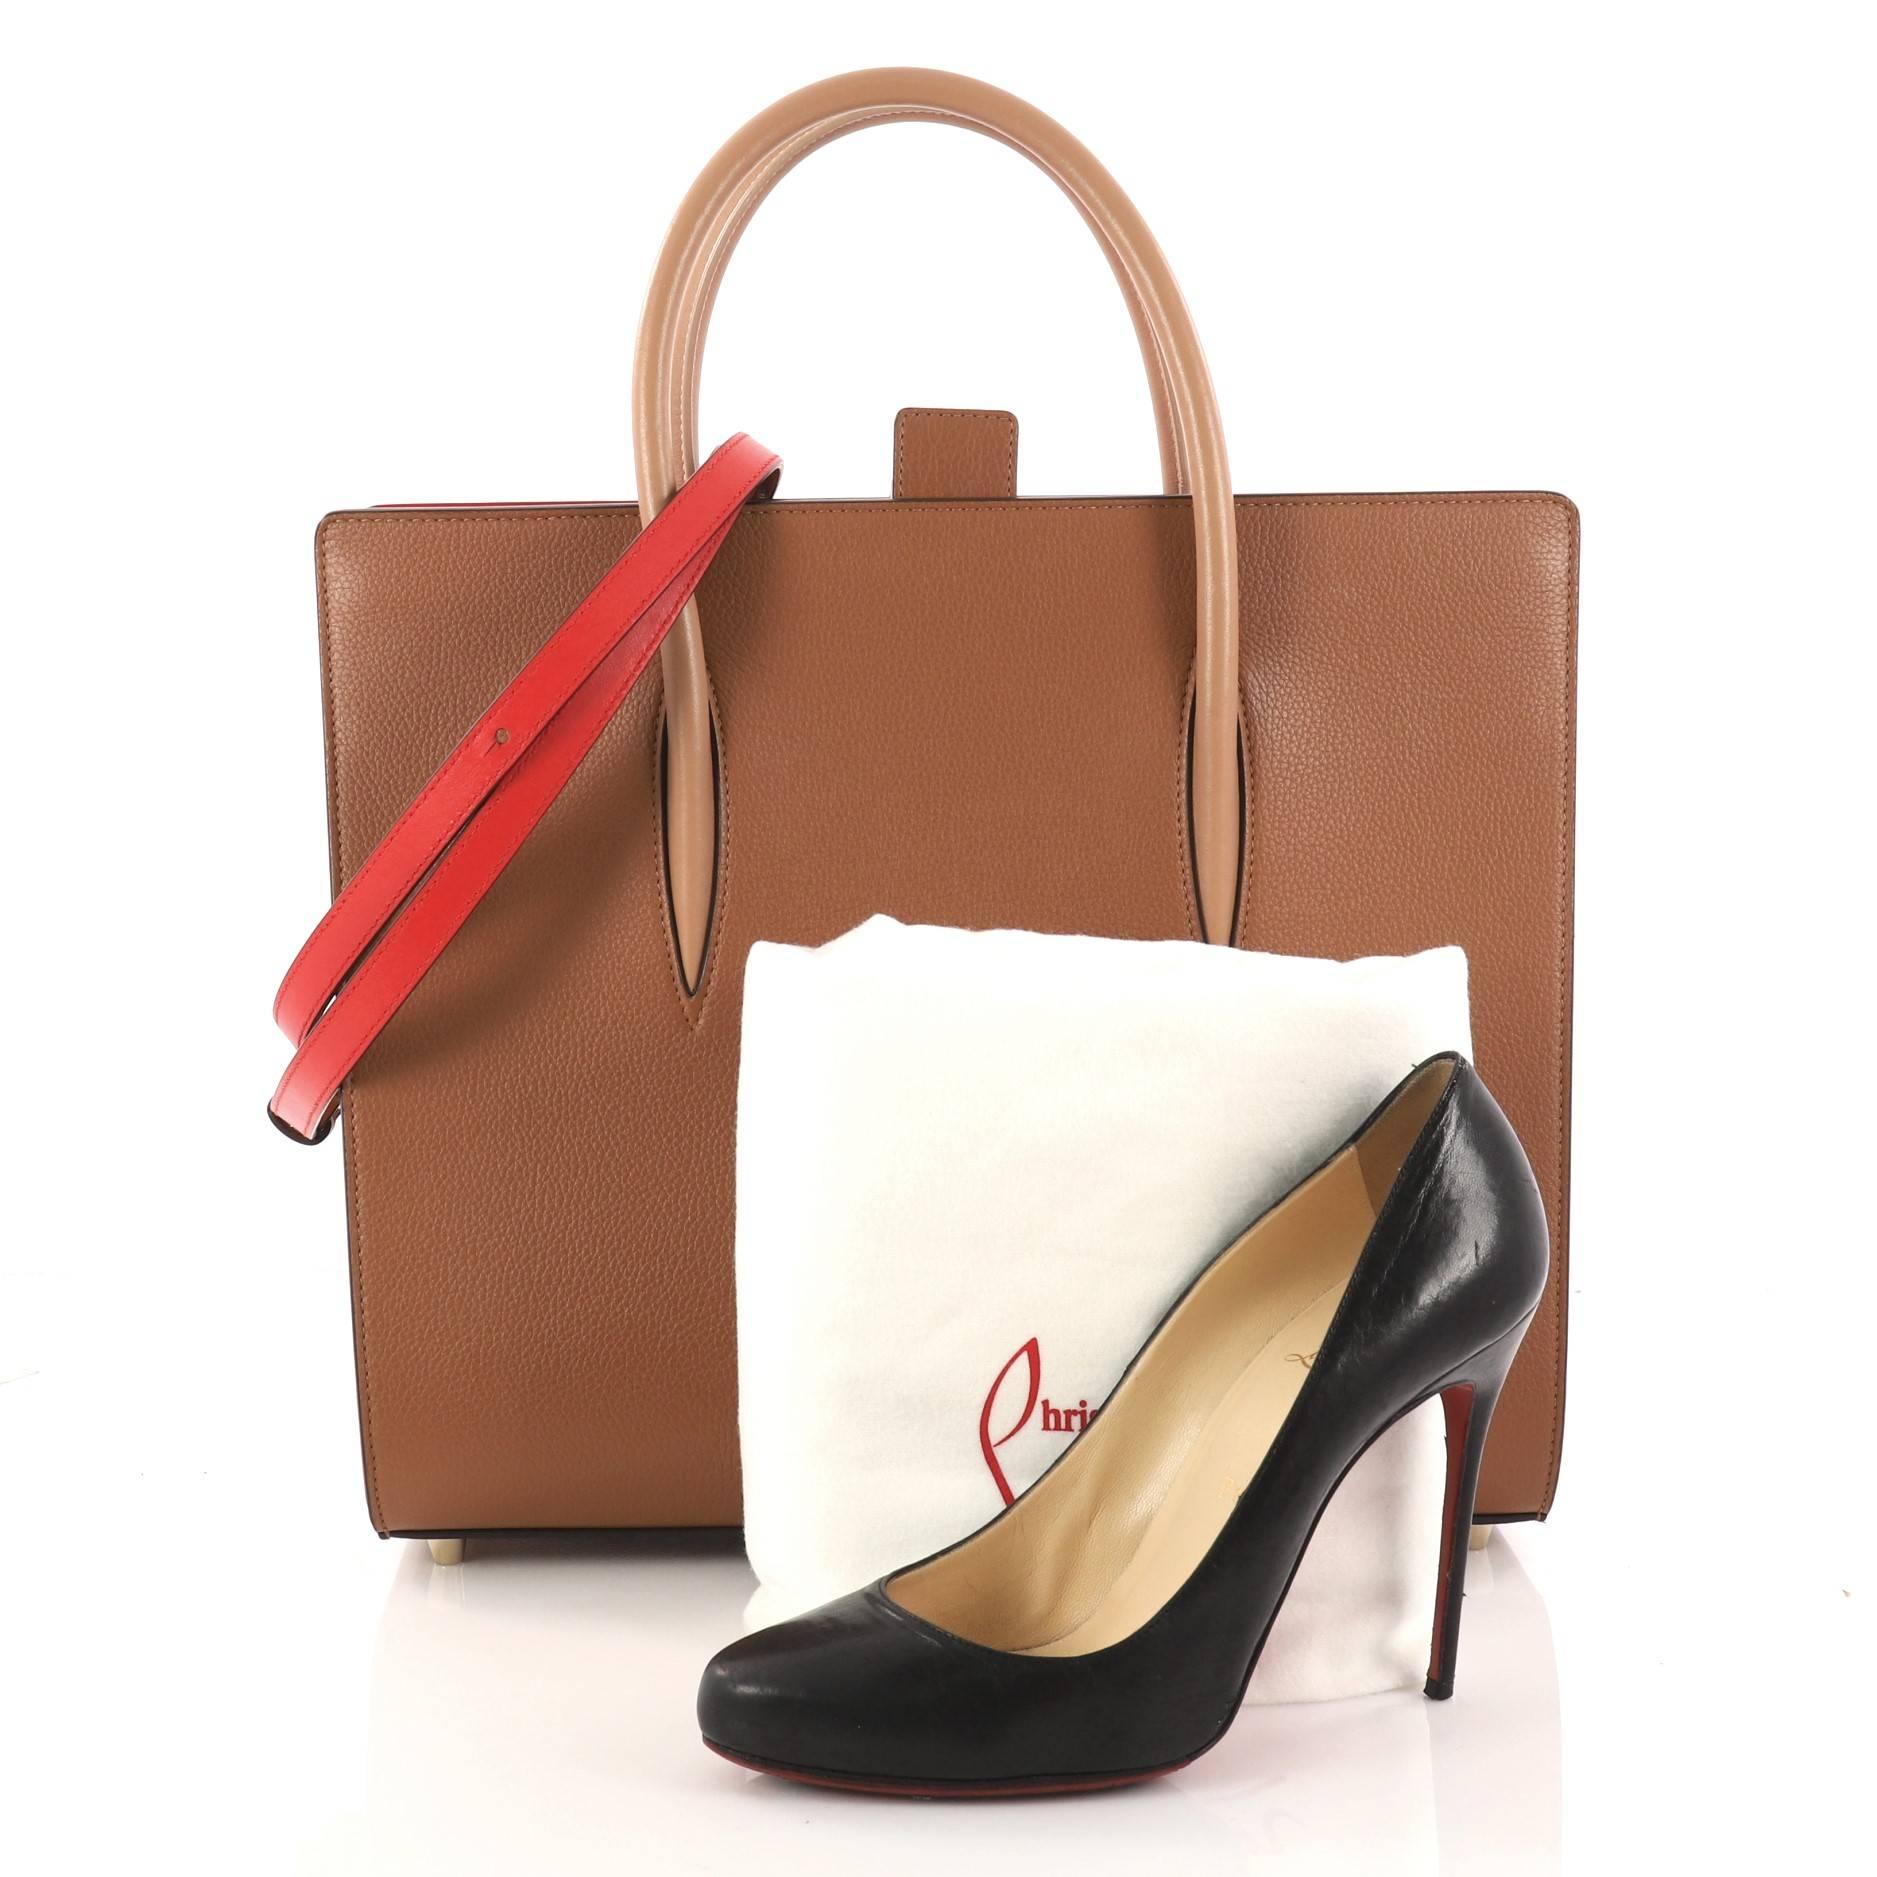 This authentic Christian Louboutin Paloma Tote Leather Large is an elegant edgy handbag made for the modern woman. Crafted in brown leather, this bag features dual-rolled leather handles, spiked patent leather on the sides, protective base studs,